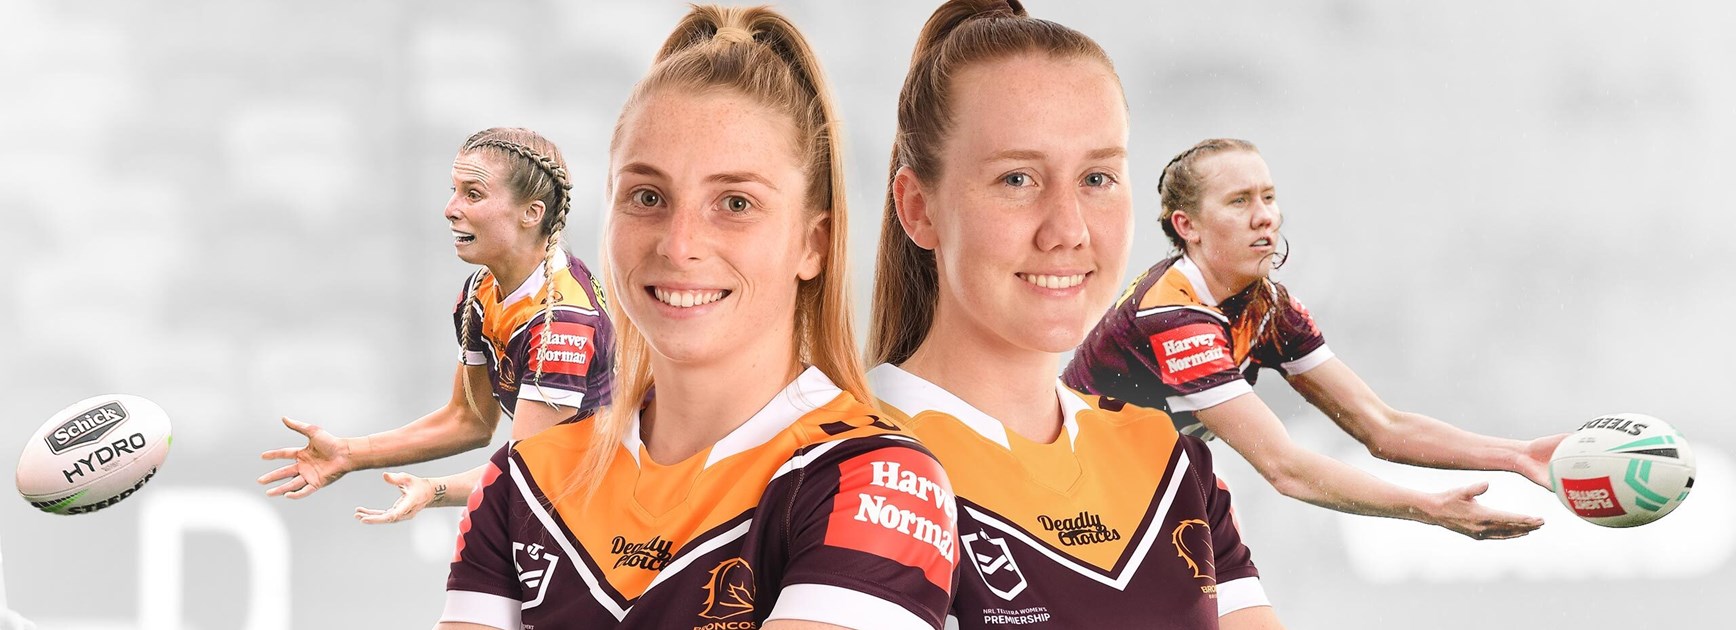 Culture club: Broncos NRLW loyalty not all about winning